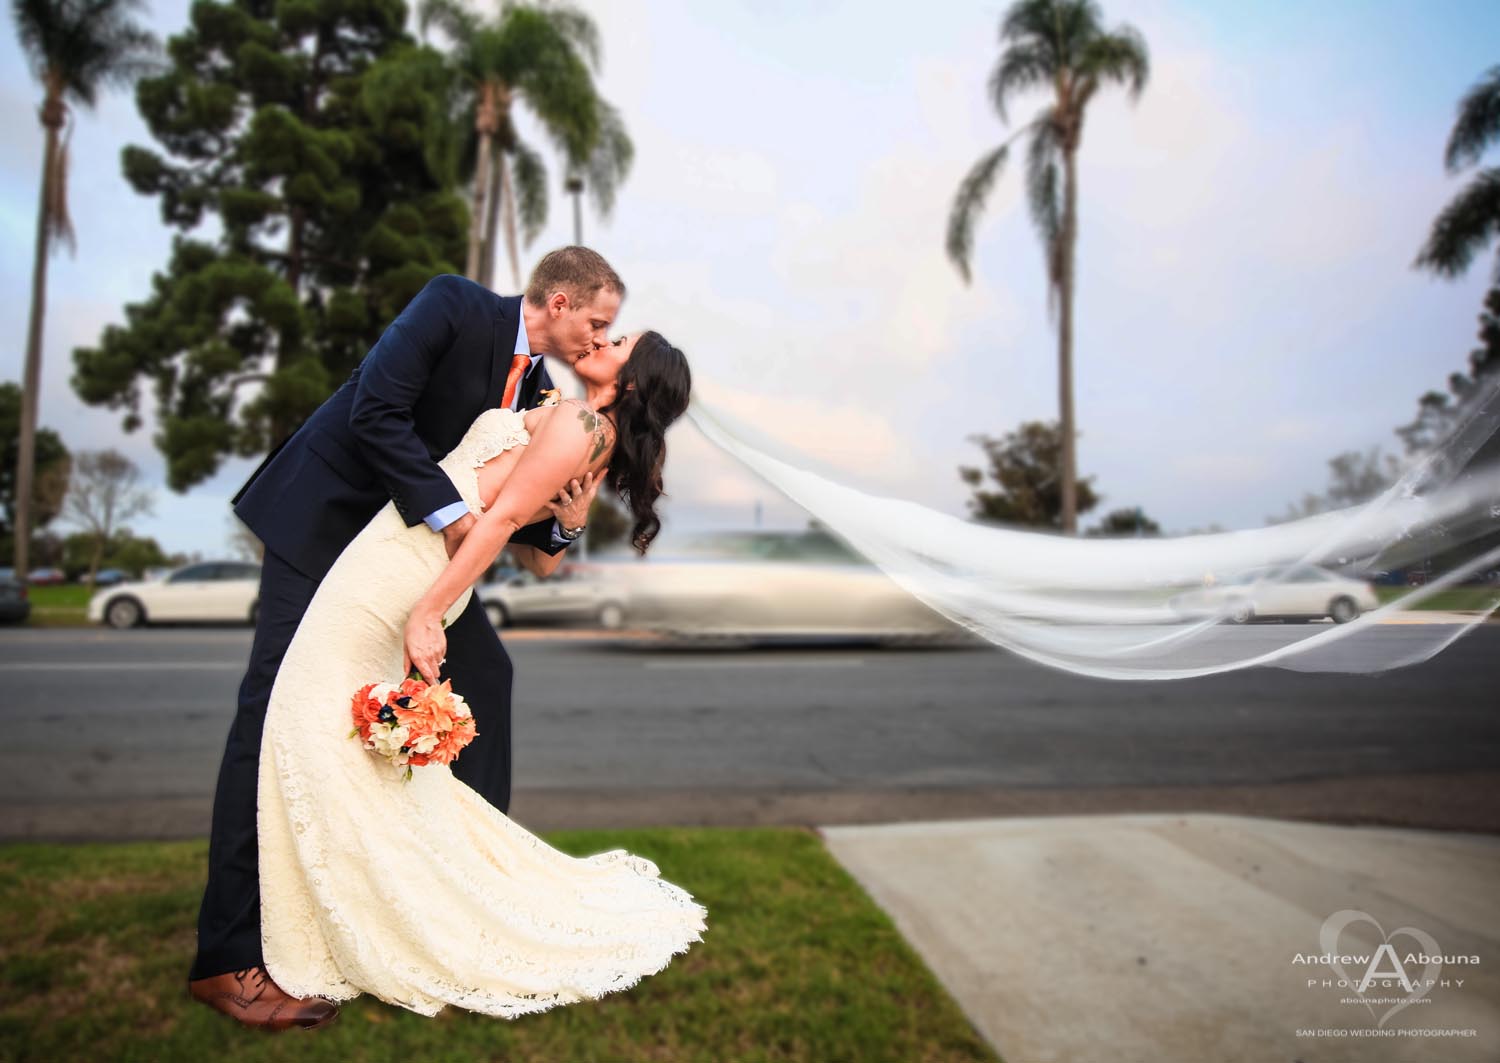 How San Diego Wedding Photography Relives The Day